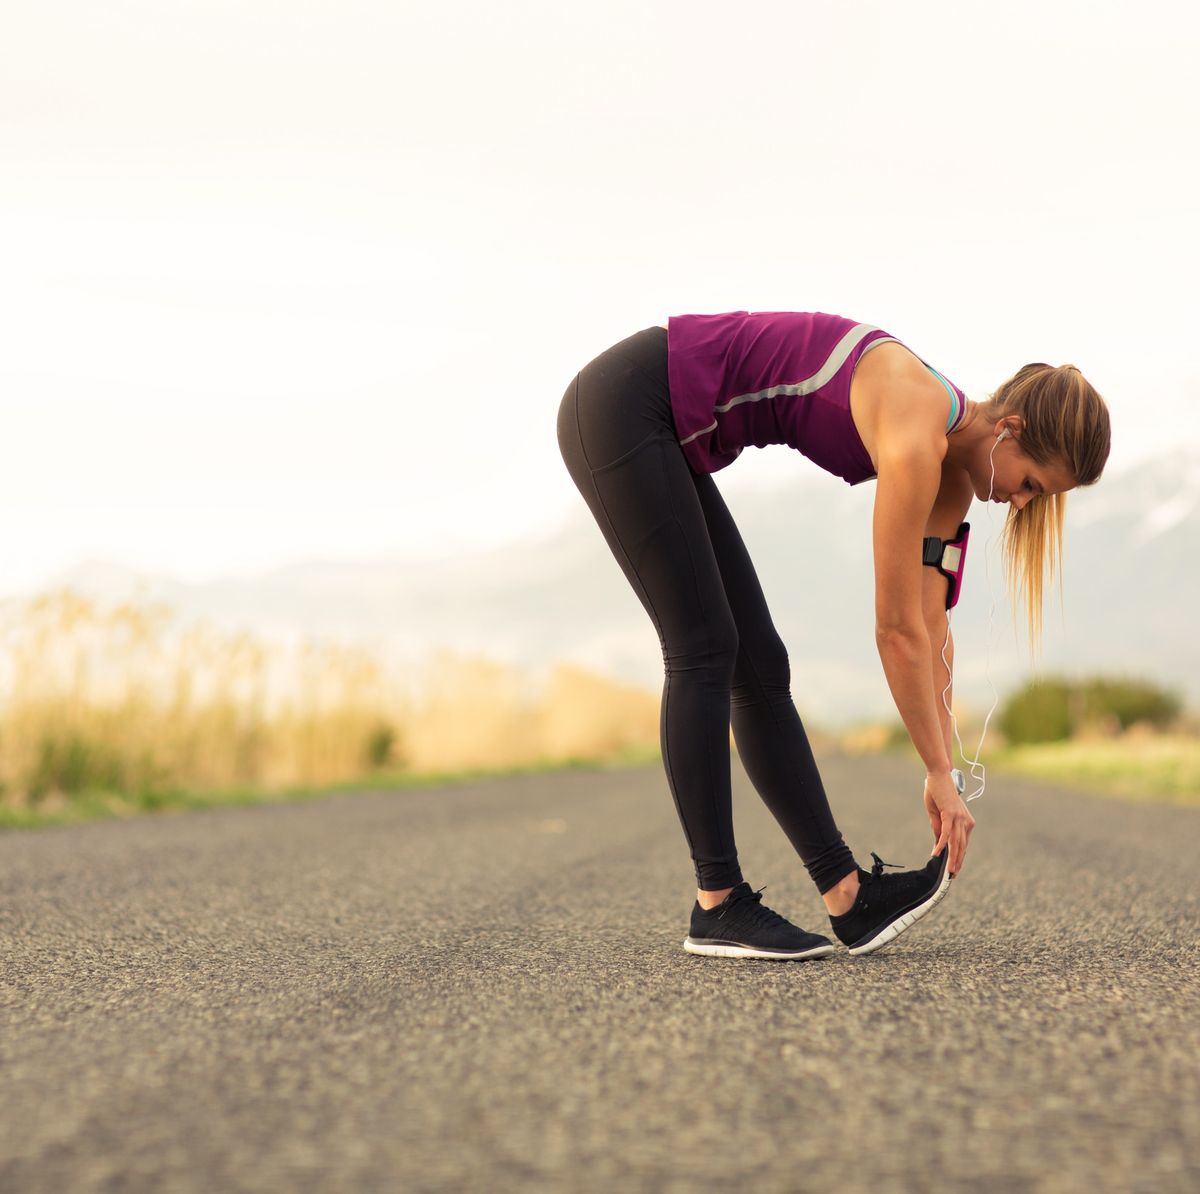 The 7 Best Hamstring Stretches For Runners